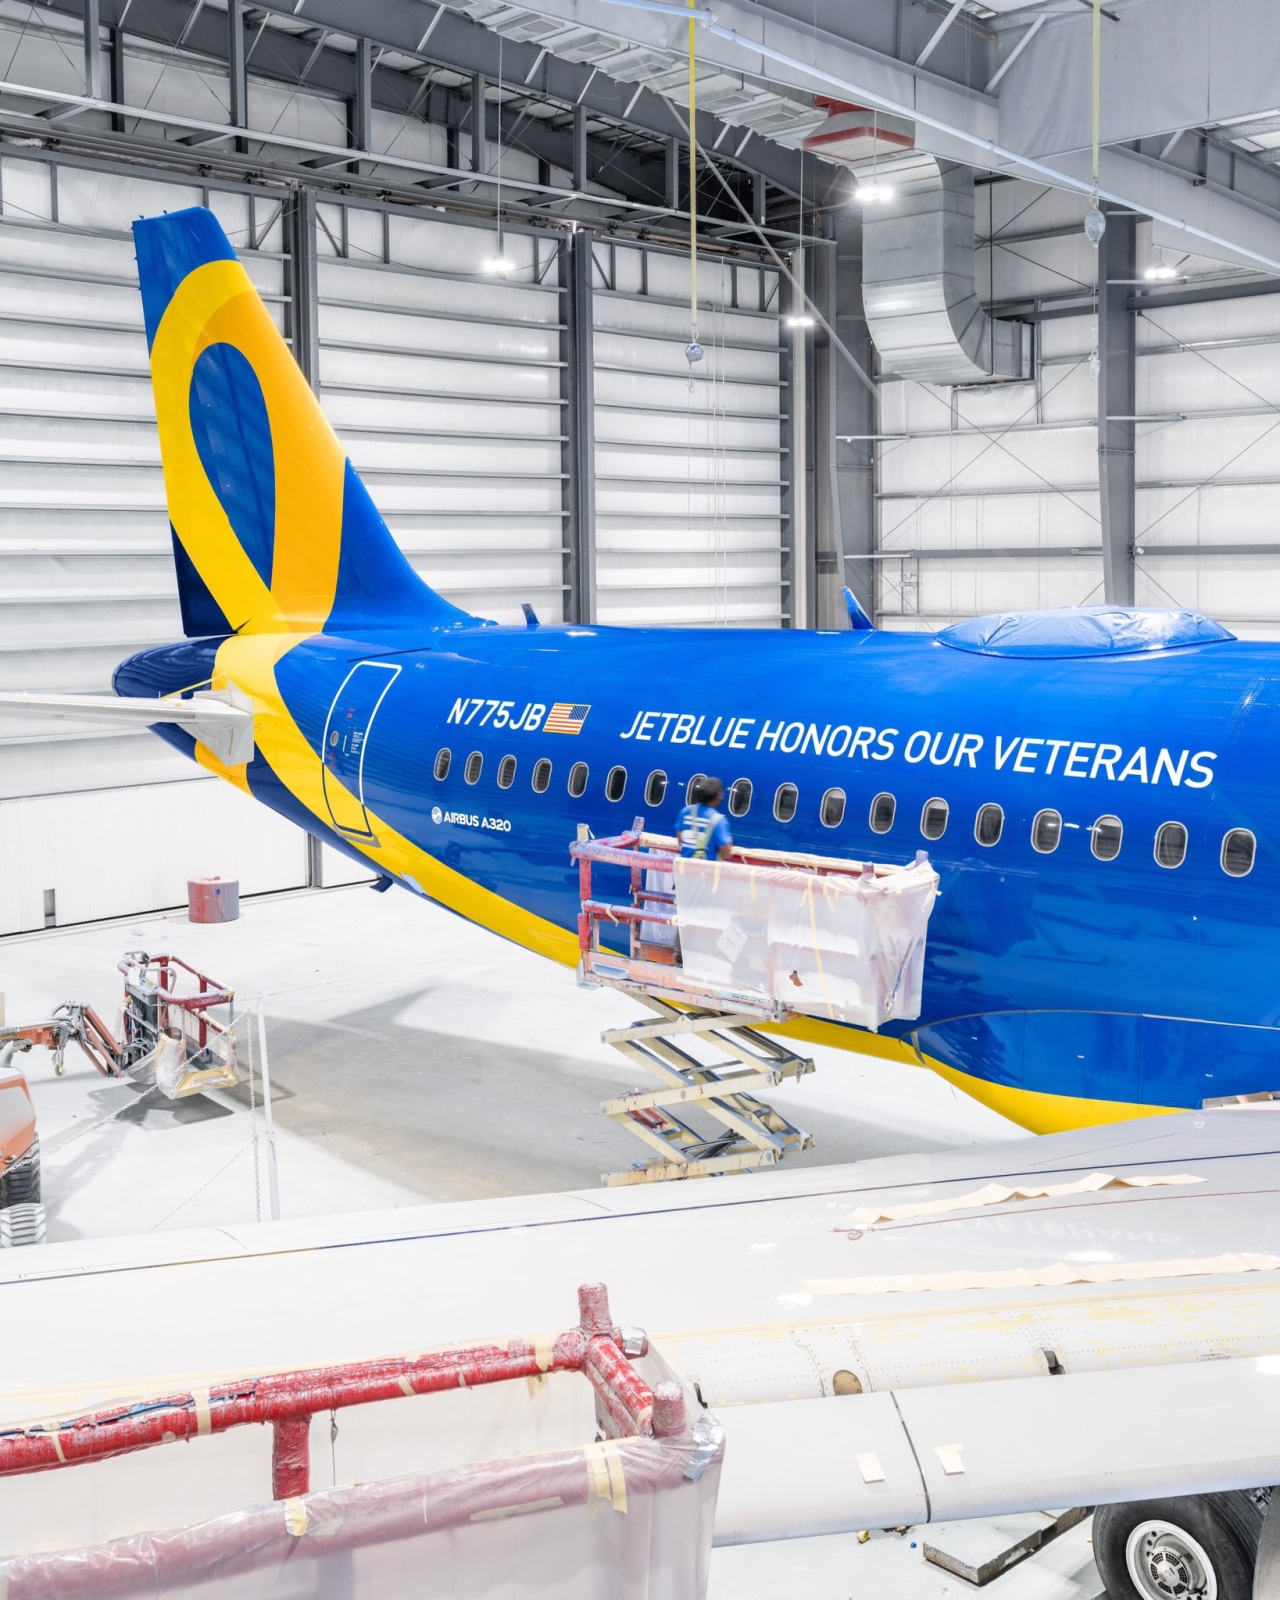 Blue and yellow airplane in hangar